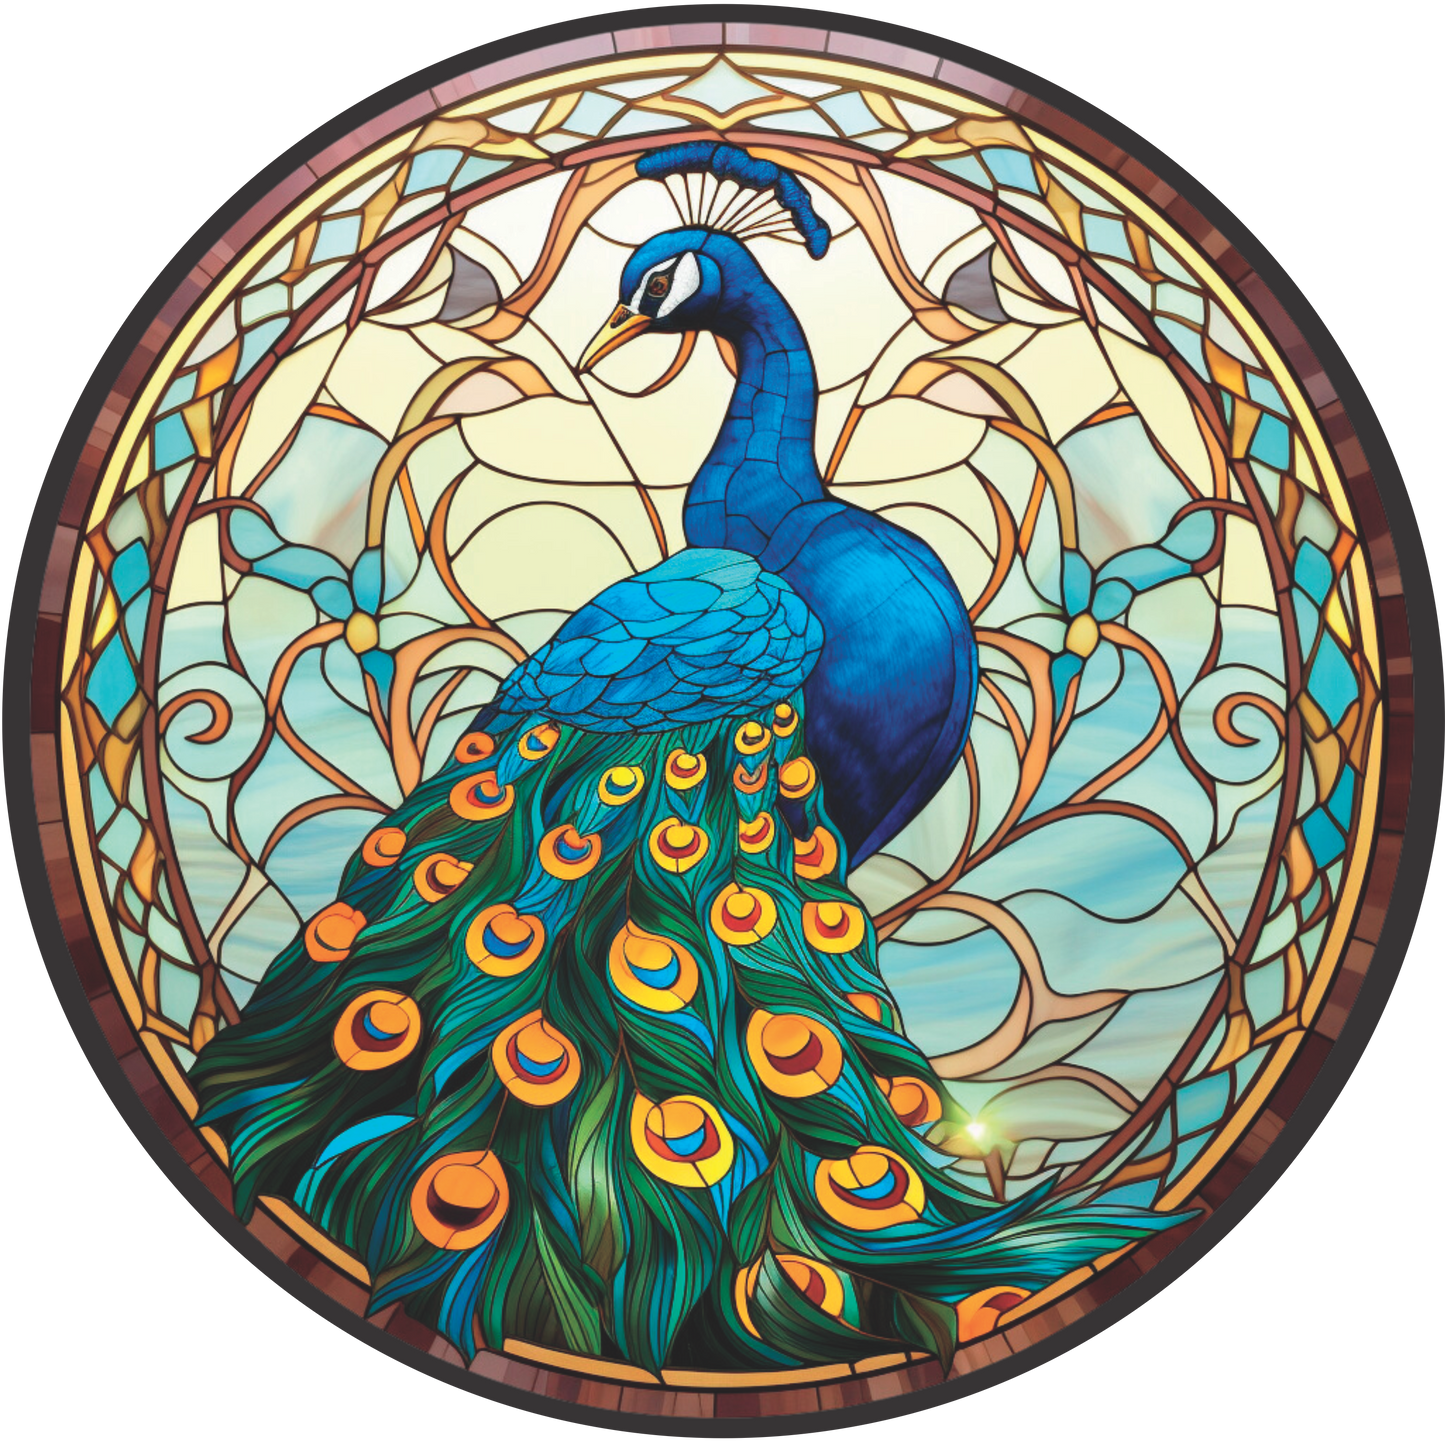 Framed Peacock Teal Feathers Stained Glass Wreath Sign Round